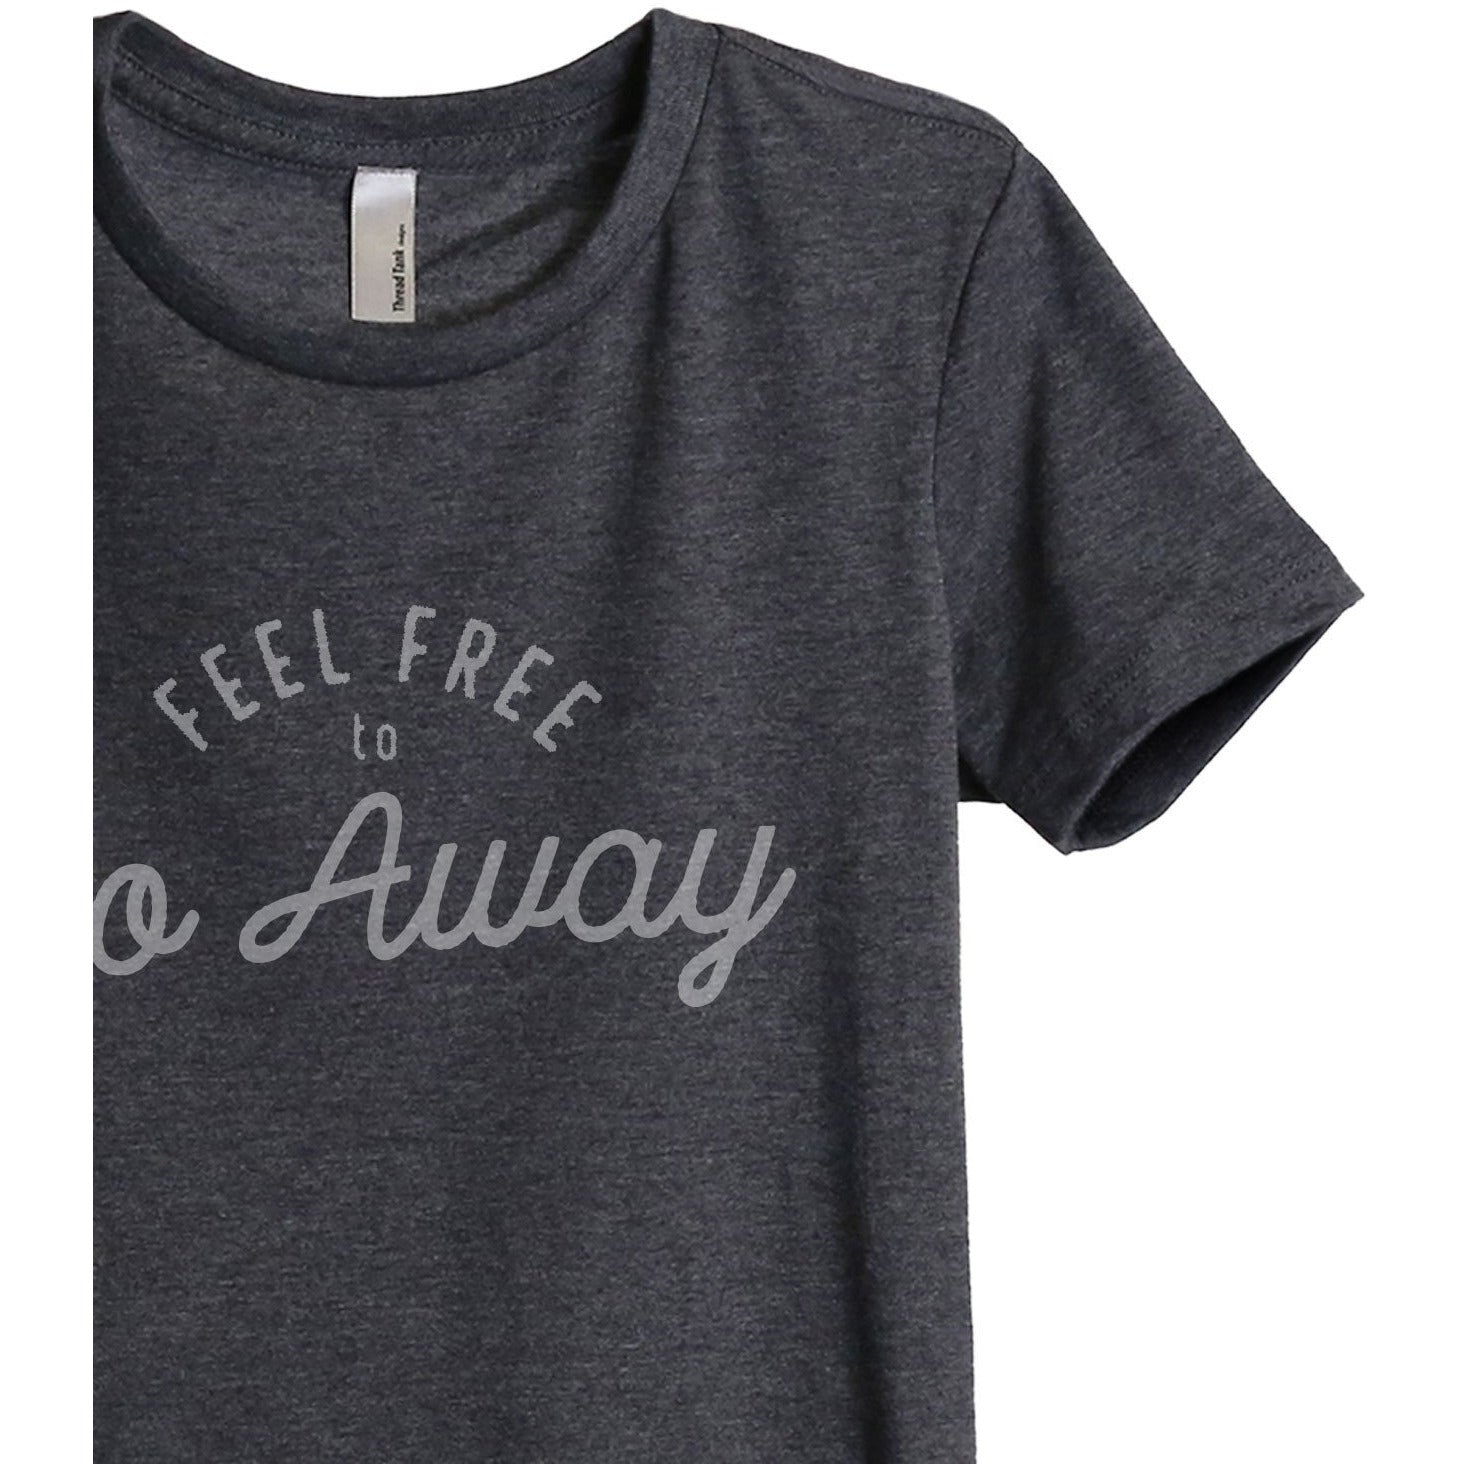 Feel Free To Go Away Women's Relaxed Crewneck T-Shirt Top Tee Charcoal Grey Zoom Details